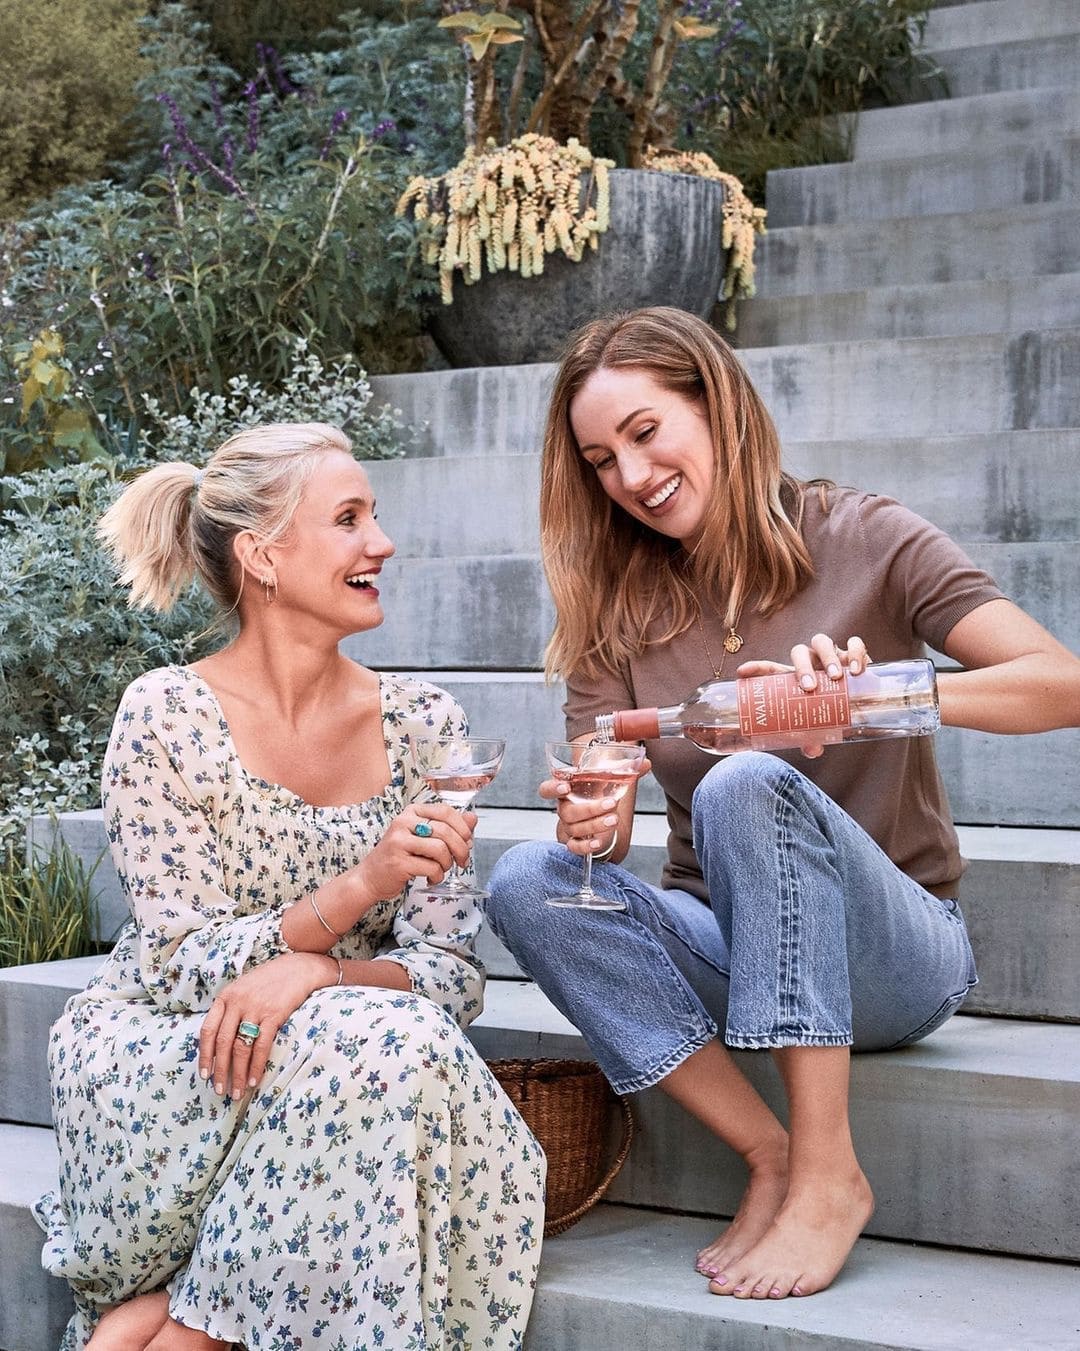 Cameron Diaz and Katherine Power introducing their clean wine brand, Avaline, which began “out of a desire to bring transparency to the wine in your glass